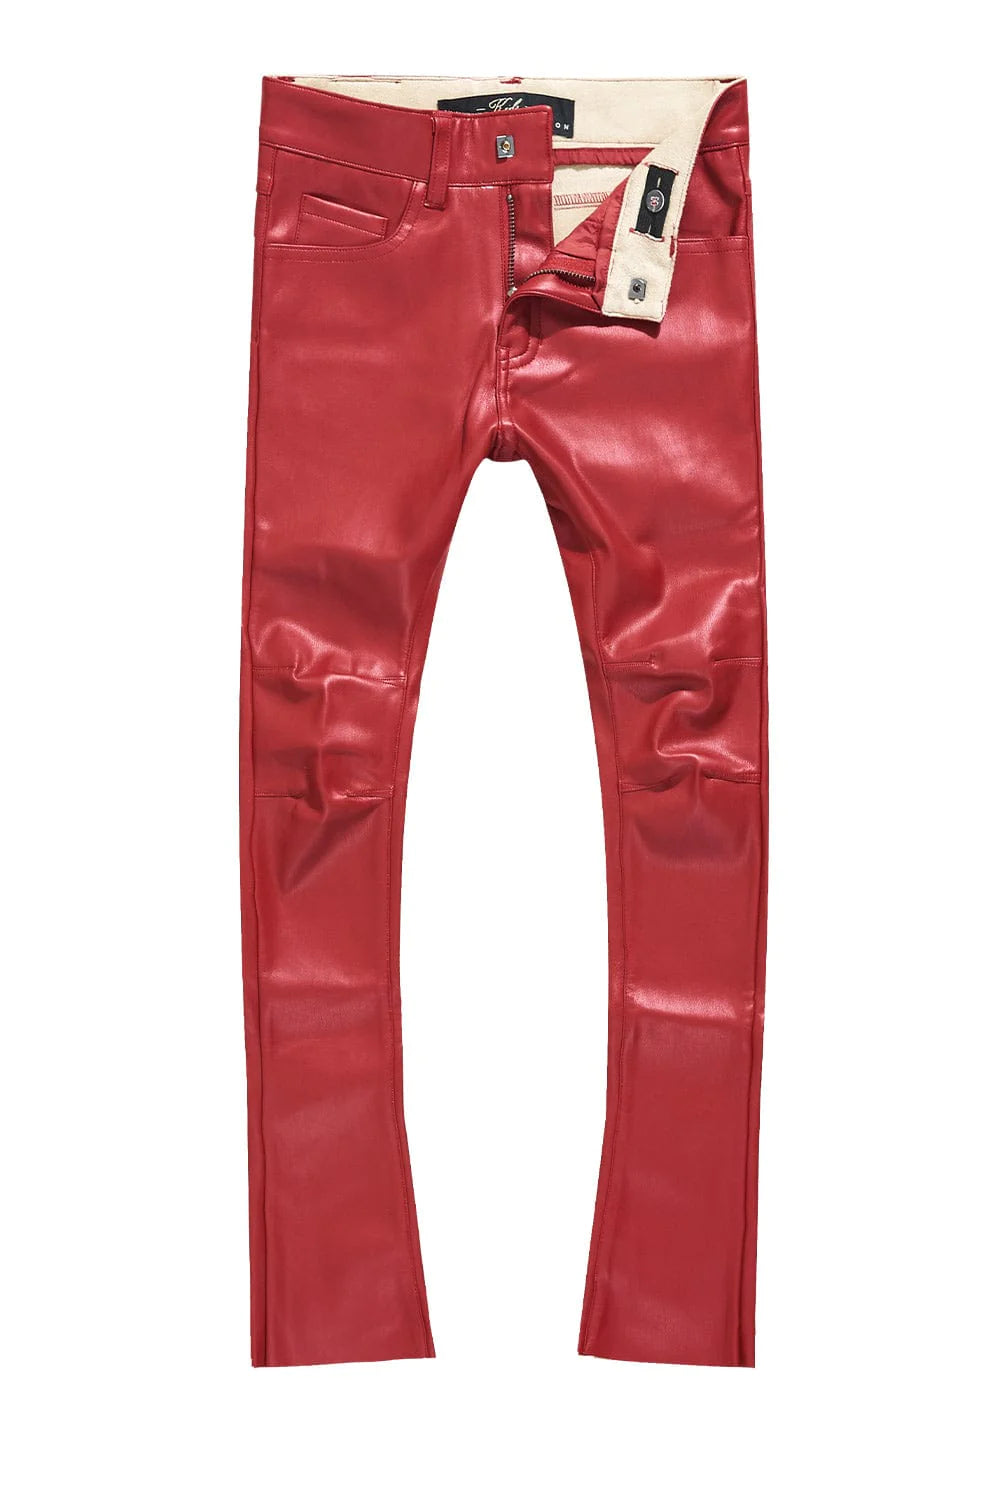 Kids Stacked Thriller Pants - Red